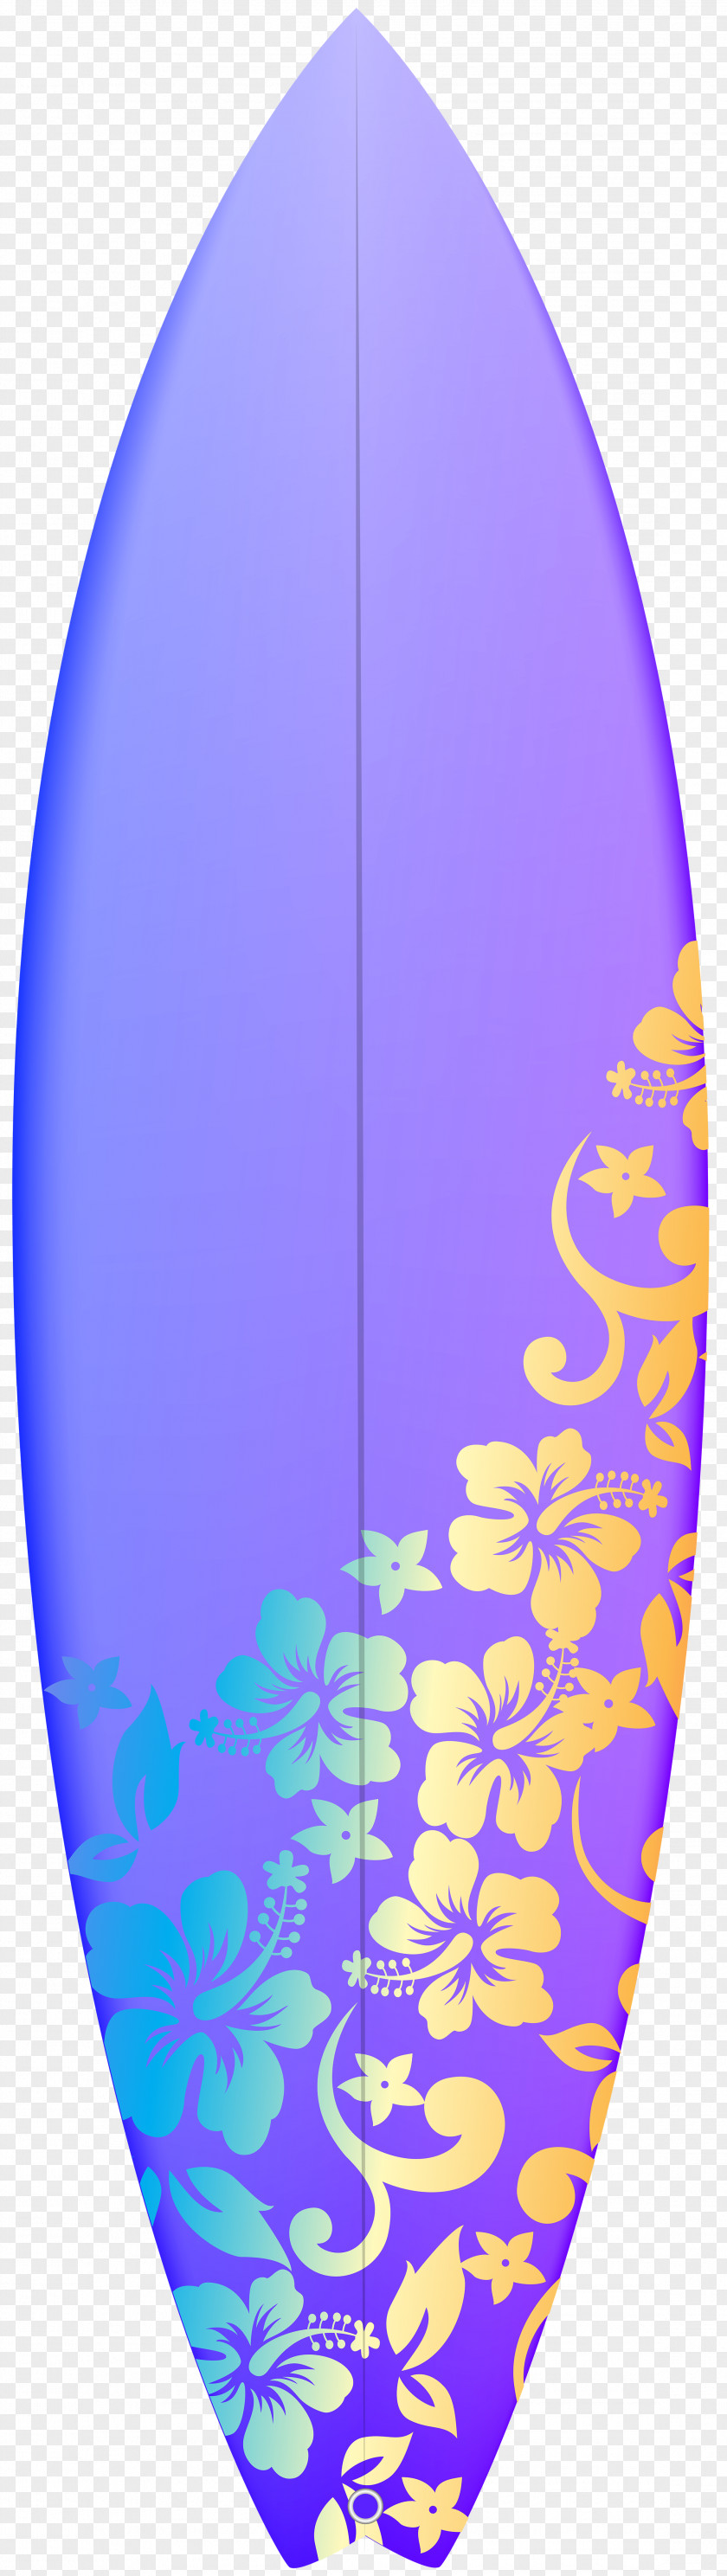 Surfing Clip Art Surfboard Transparency PNG